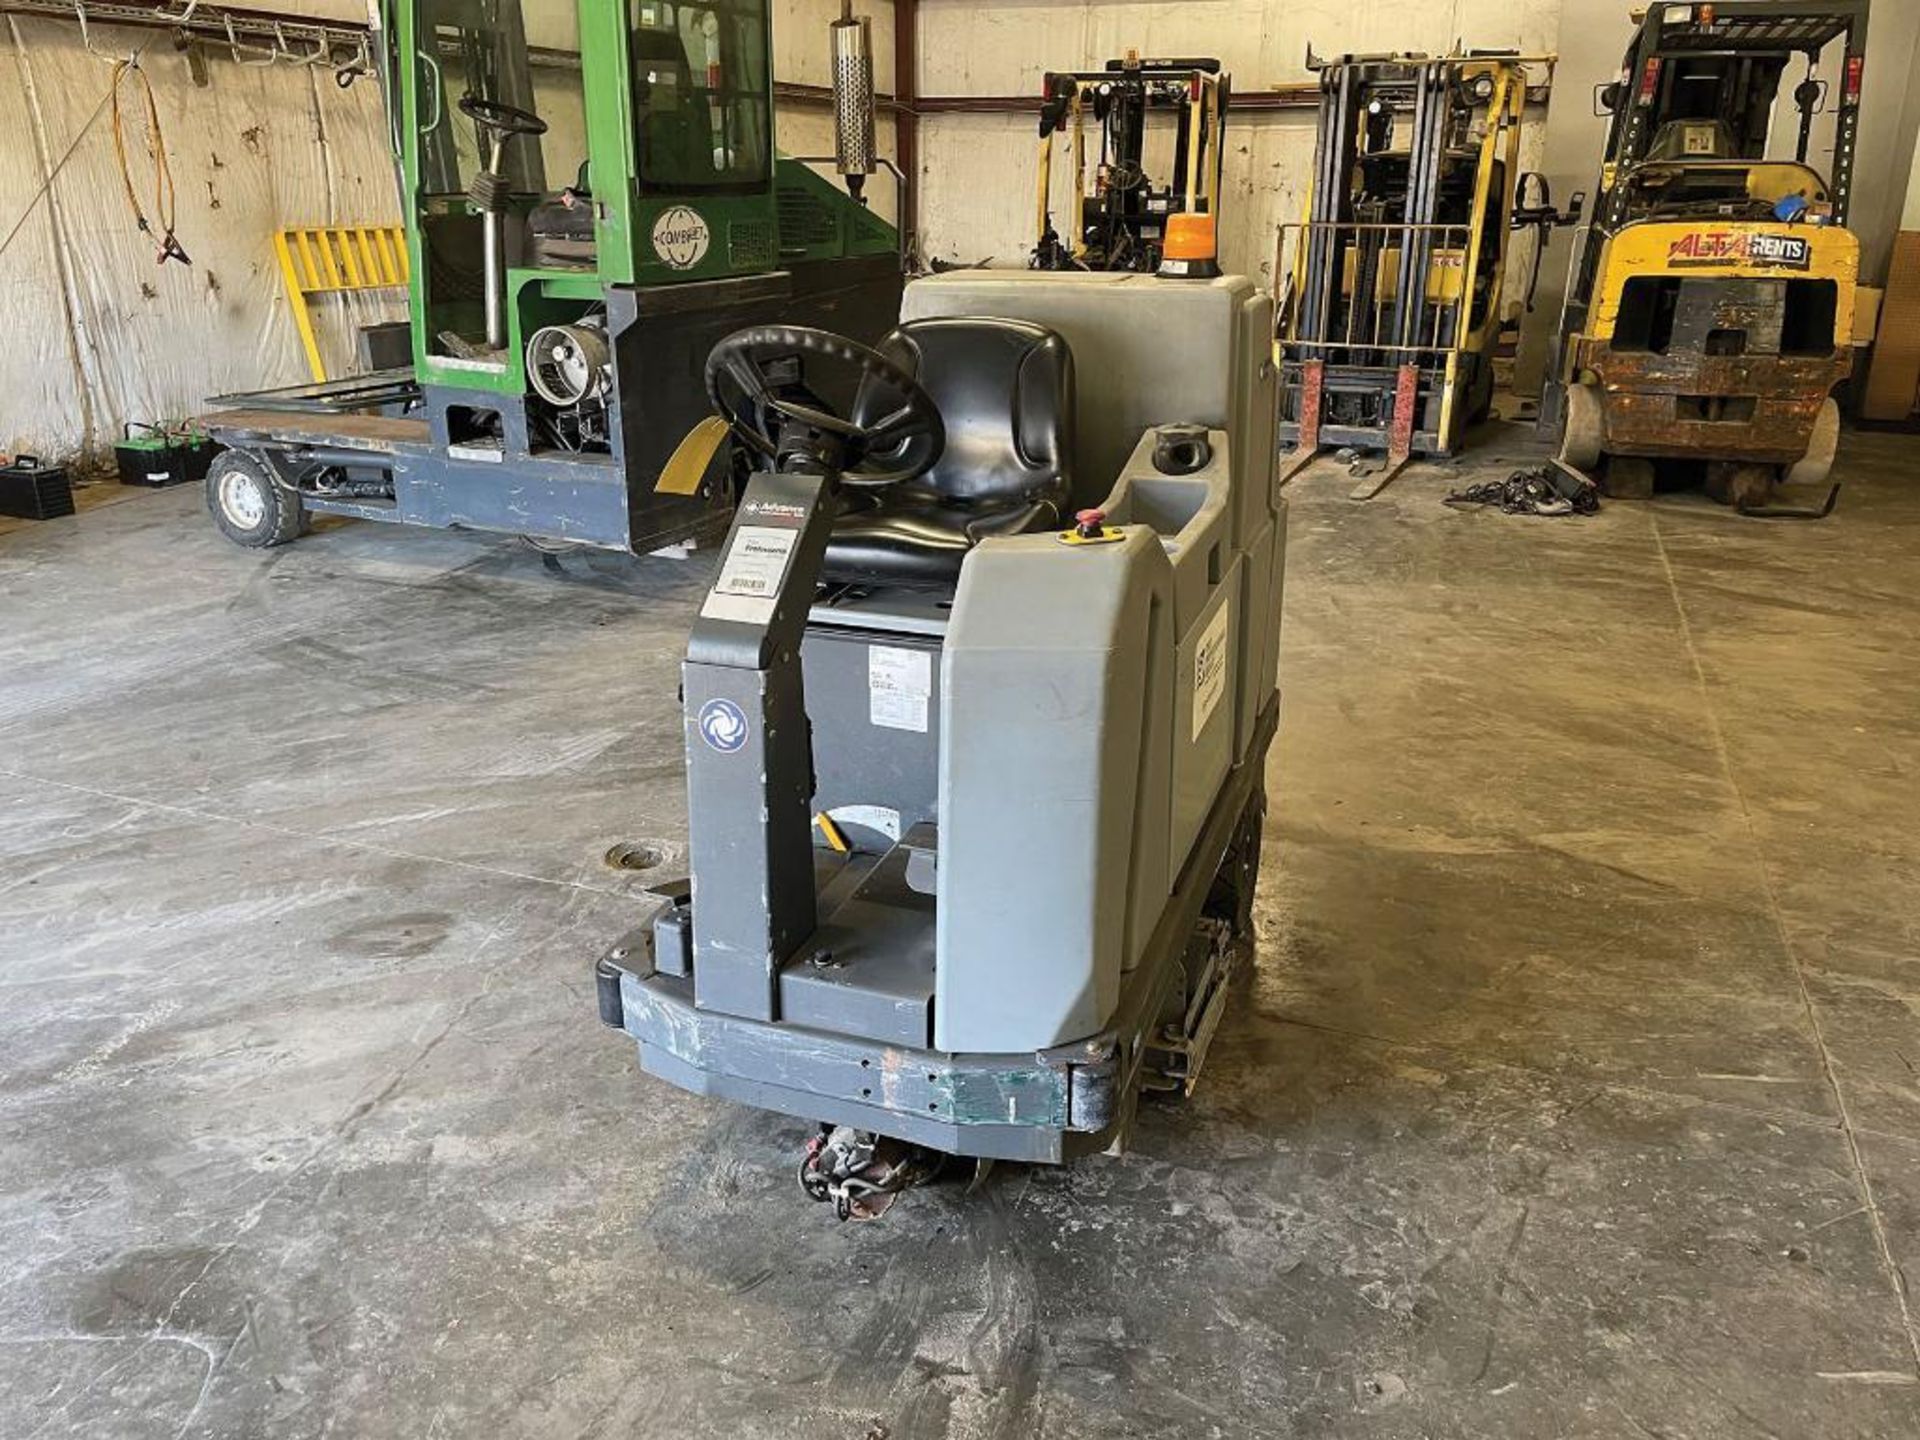 ADVANCE RIDE-ON FLOOR SCRUBBER, MODEL: 3200C, S/N: 1535702, 24-VOLT, WEIGHT: 1,962-LBS. - Image 2 of 5